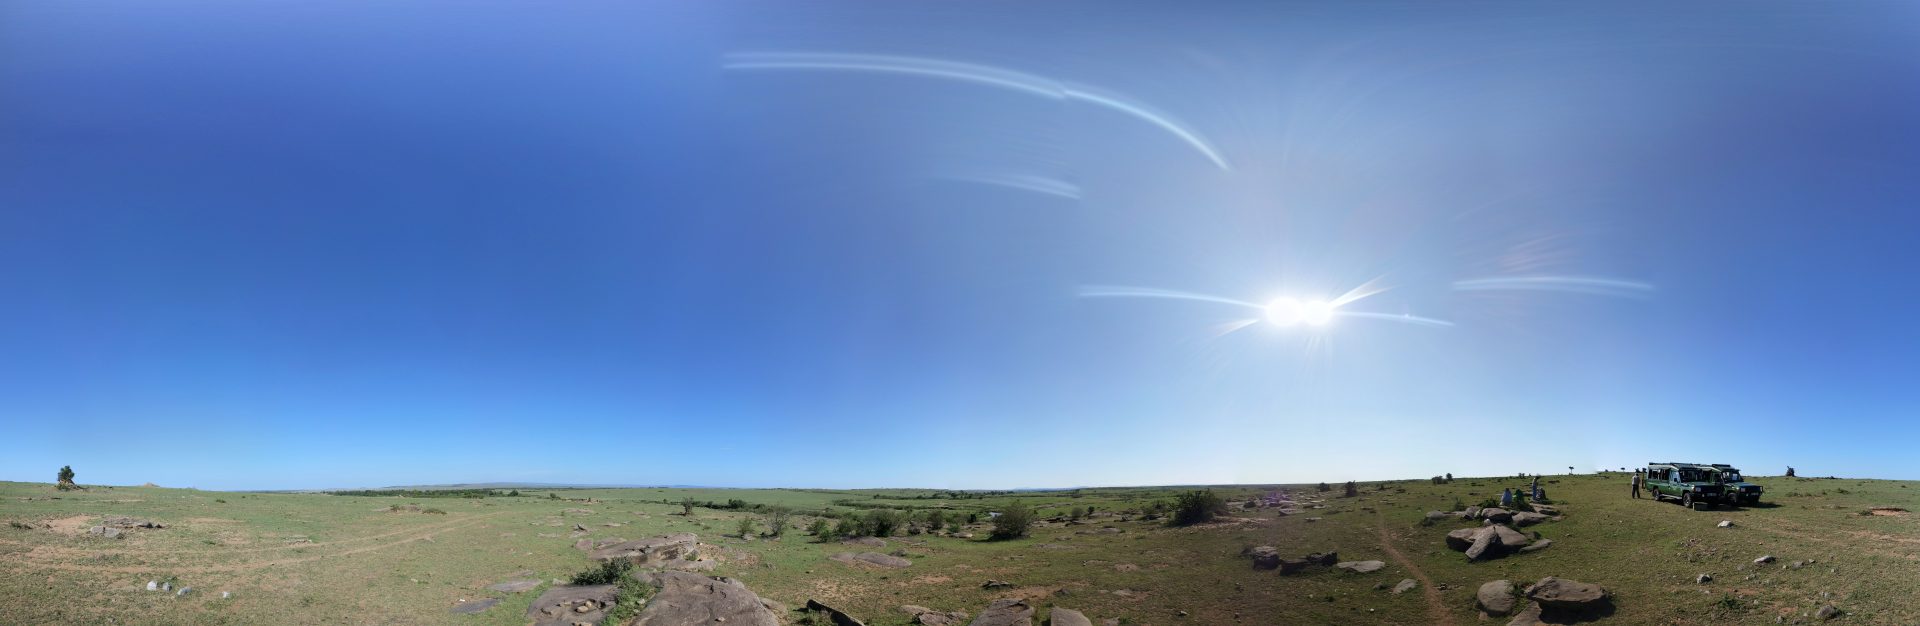 360 Degree Views from Africa